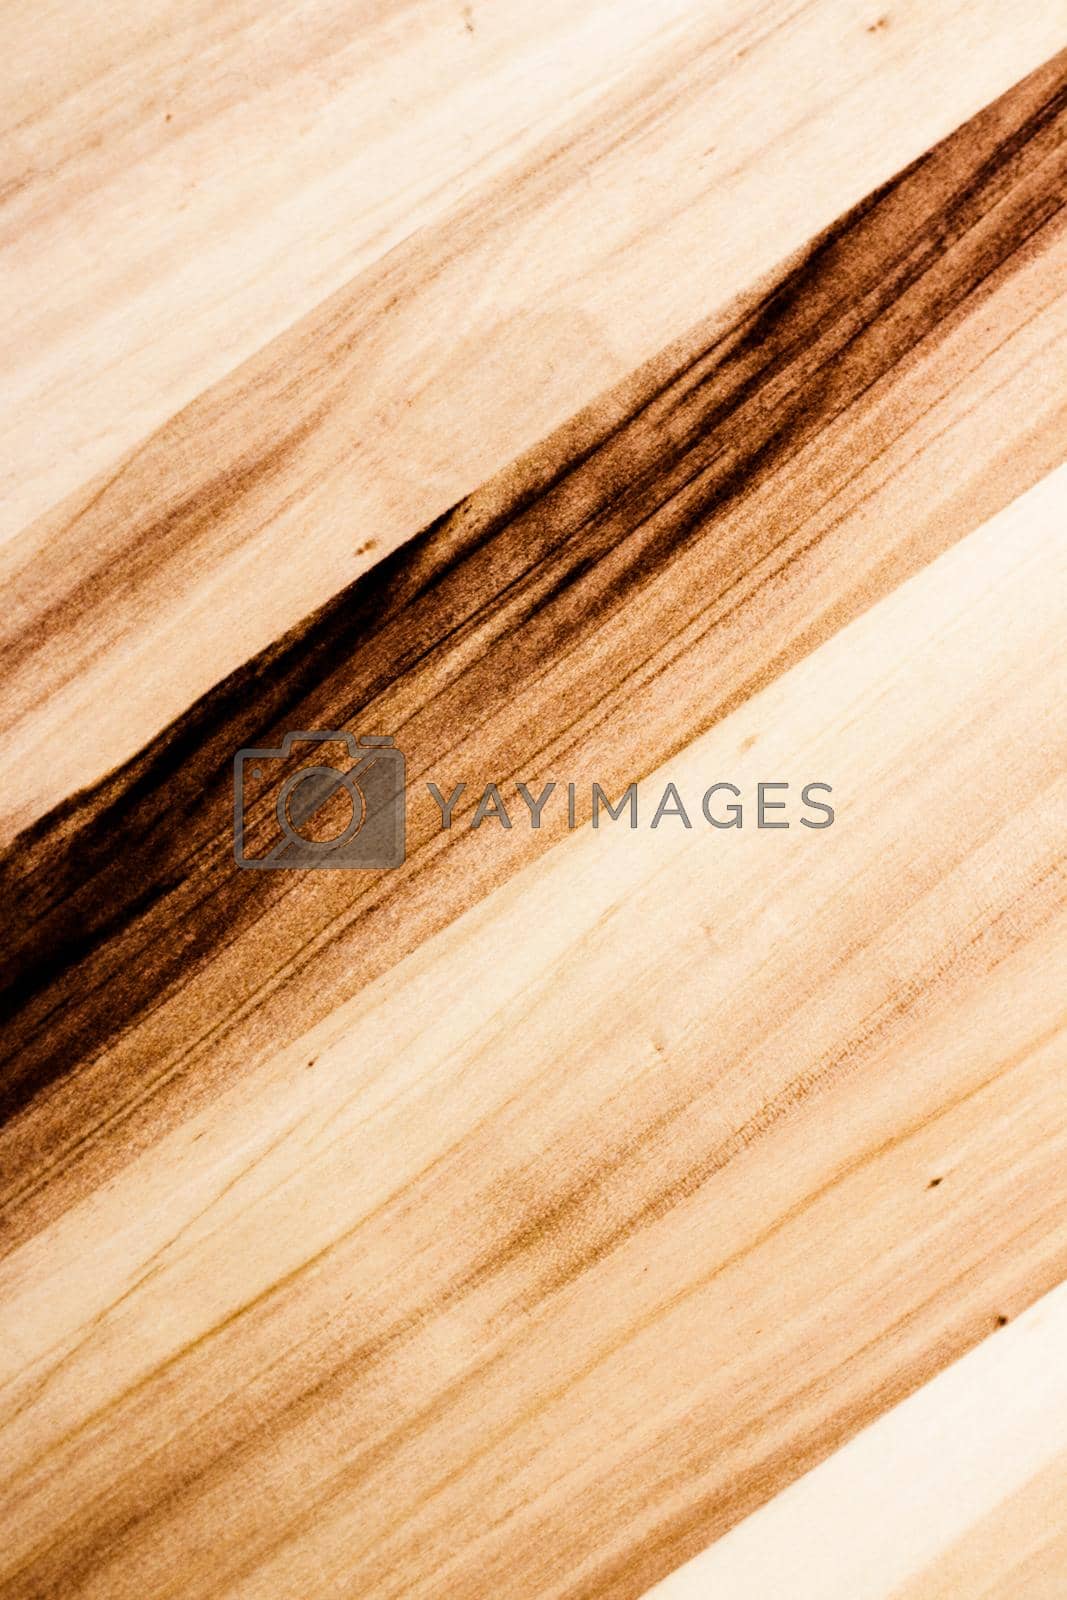 Royalty free image of Wooden plank textured background by Anneleven